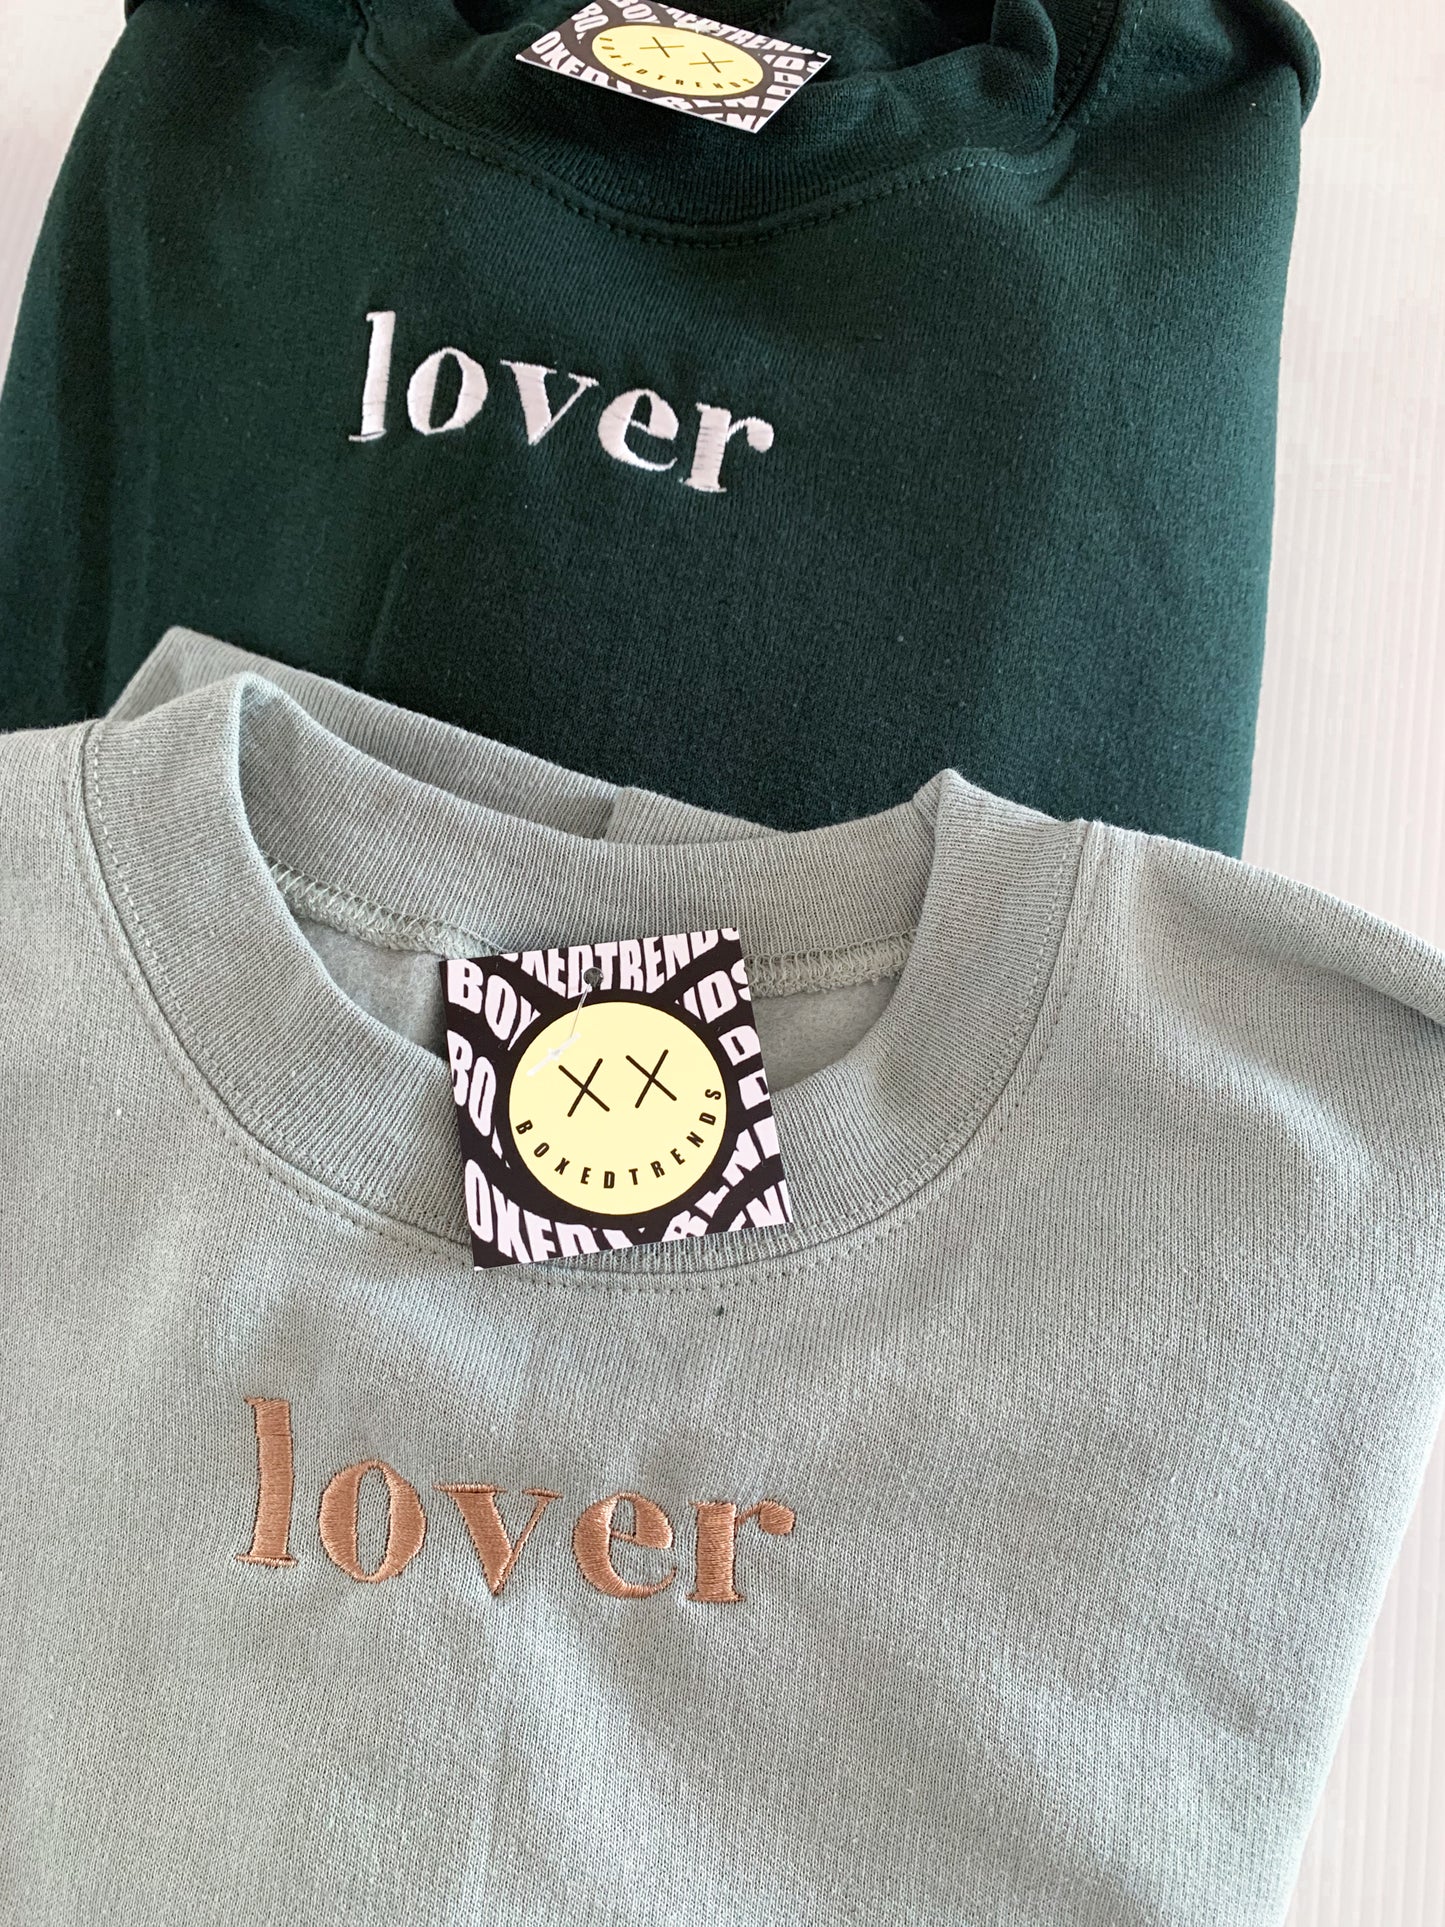 "lover" Embroidered Matching Set